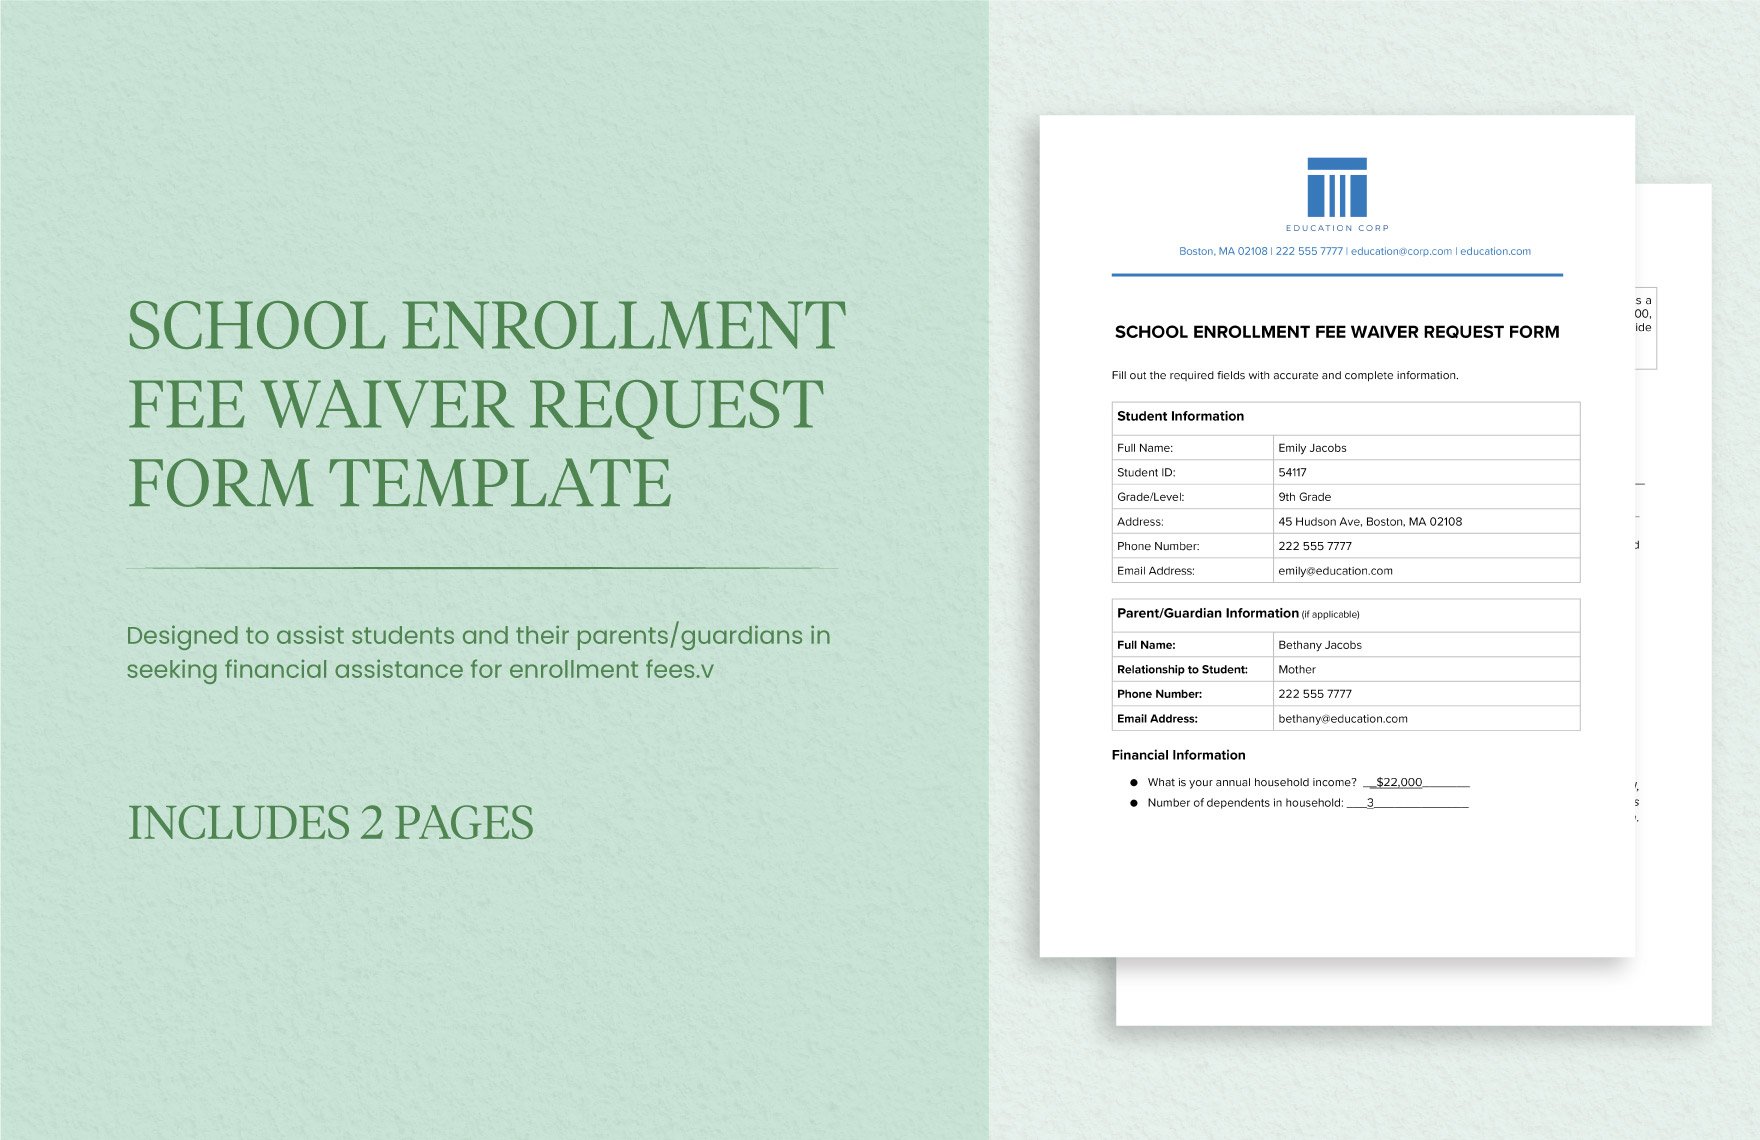 School Enrollment Fee Waiver Request Form Template in Word, Google Docs, PNG